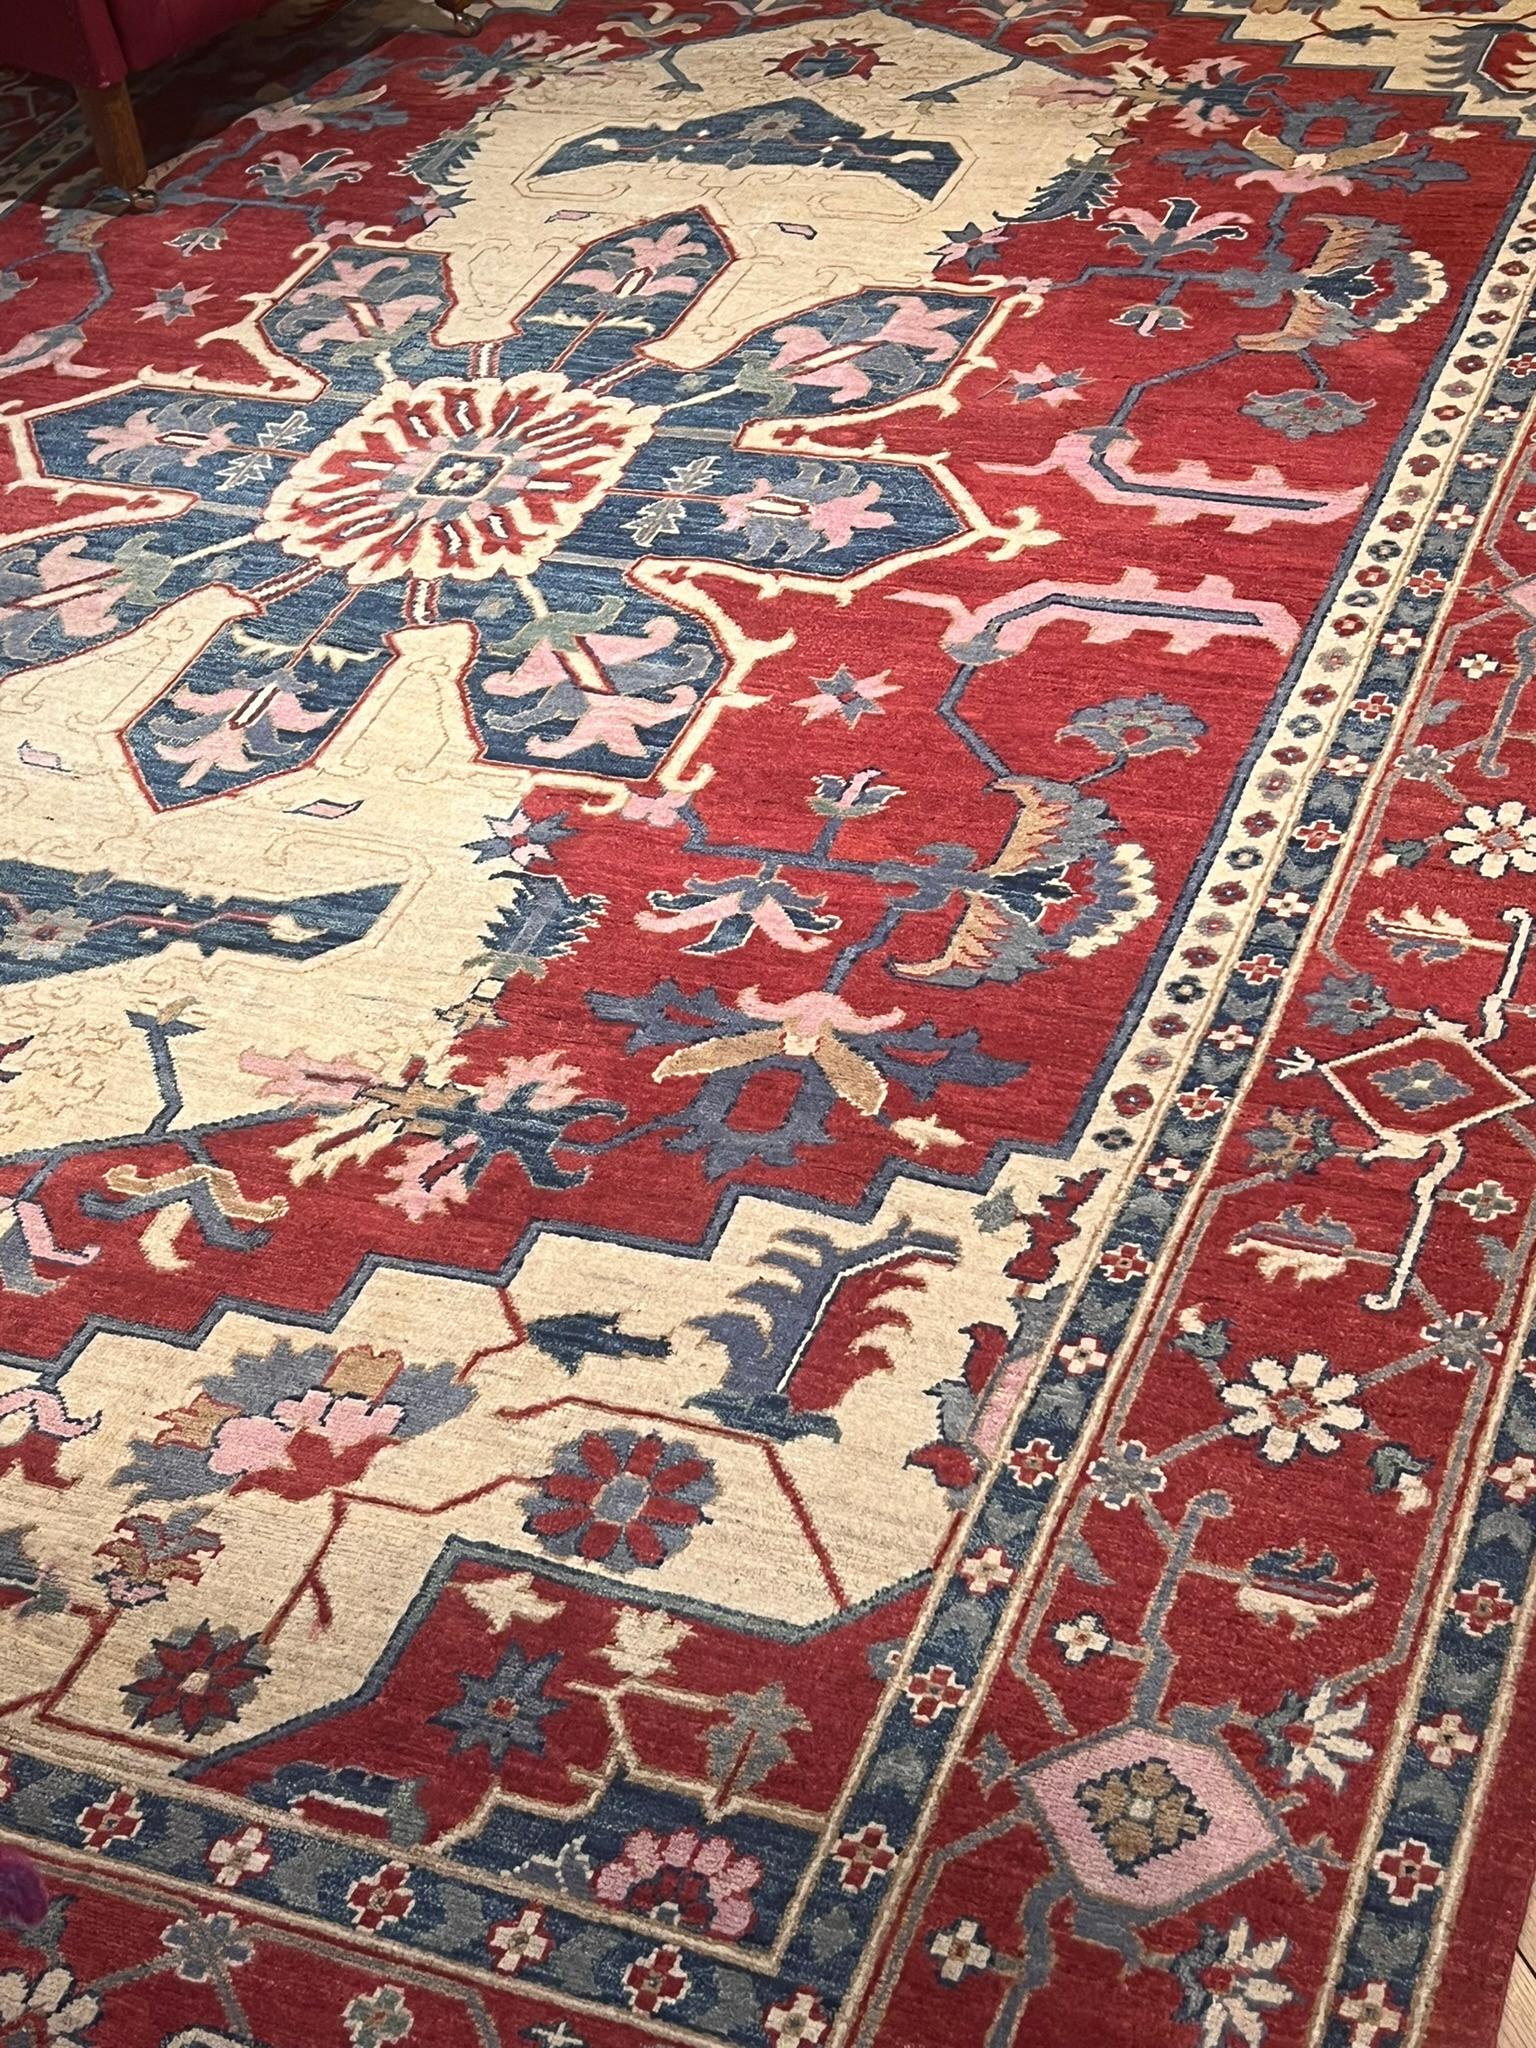 Afghan Hand-knotted carpet design inspired by ancient Serapis red and blue tones For Sale